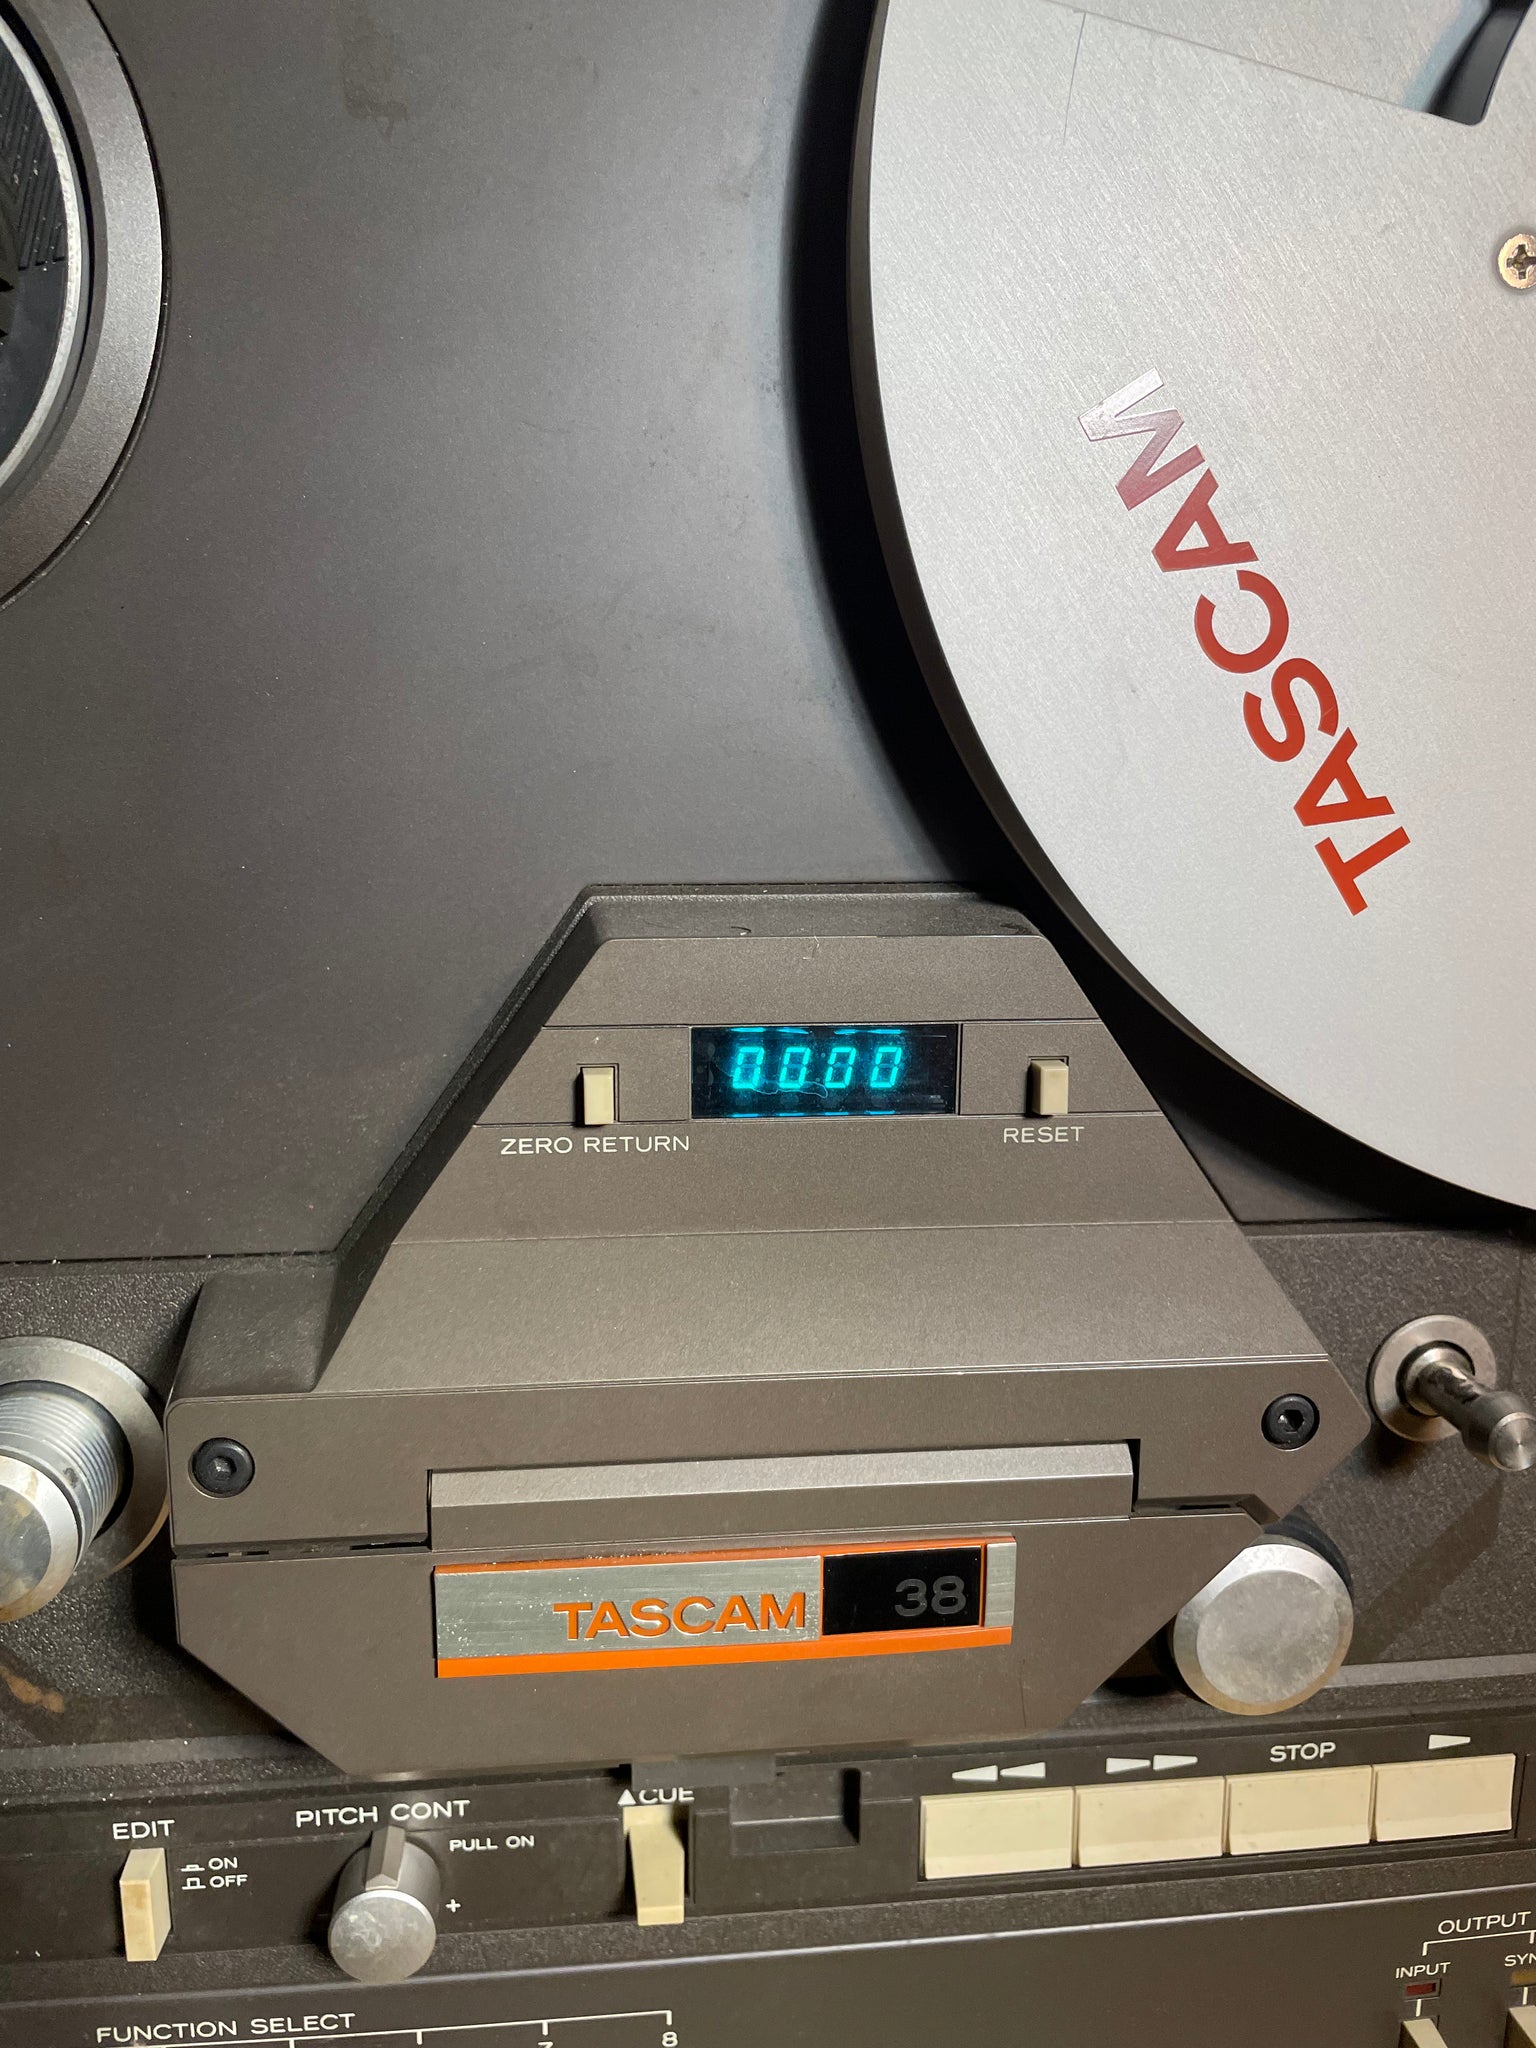 TASCAM 38 ¼ 8 TRACK REEL-TO-REEL TAPE RECORDER/REPRODUCER